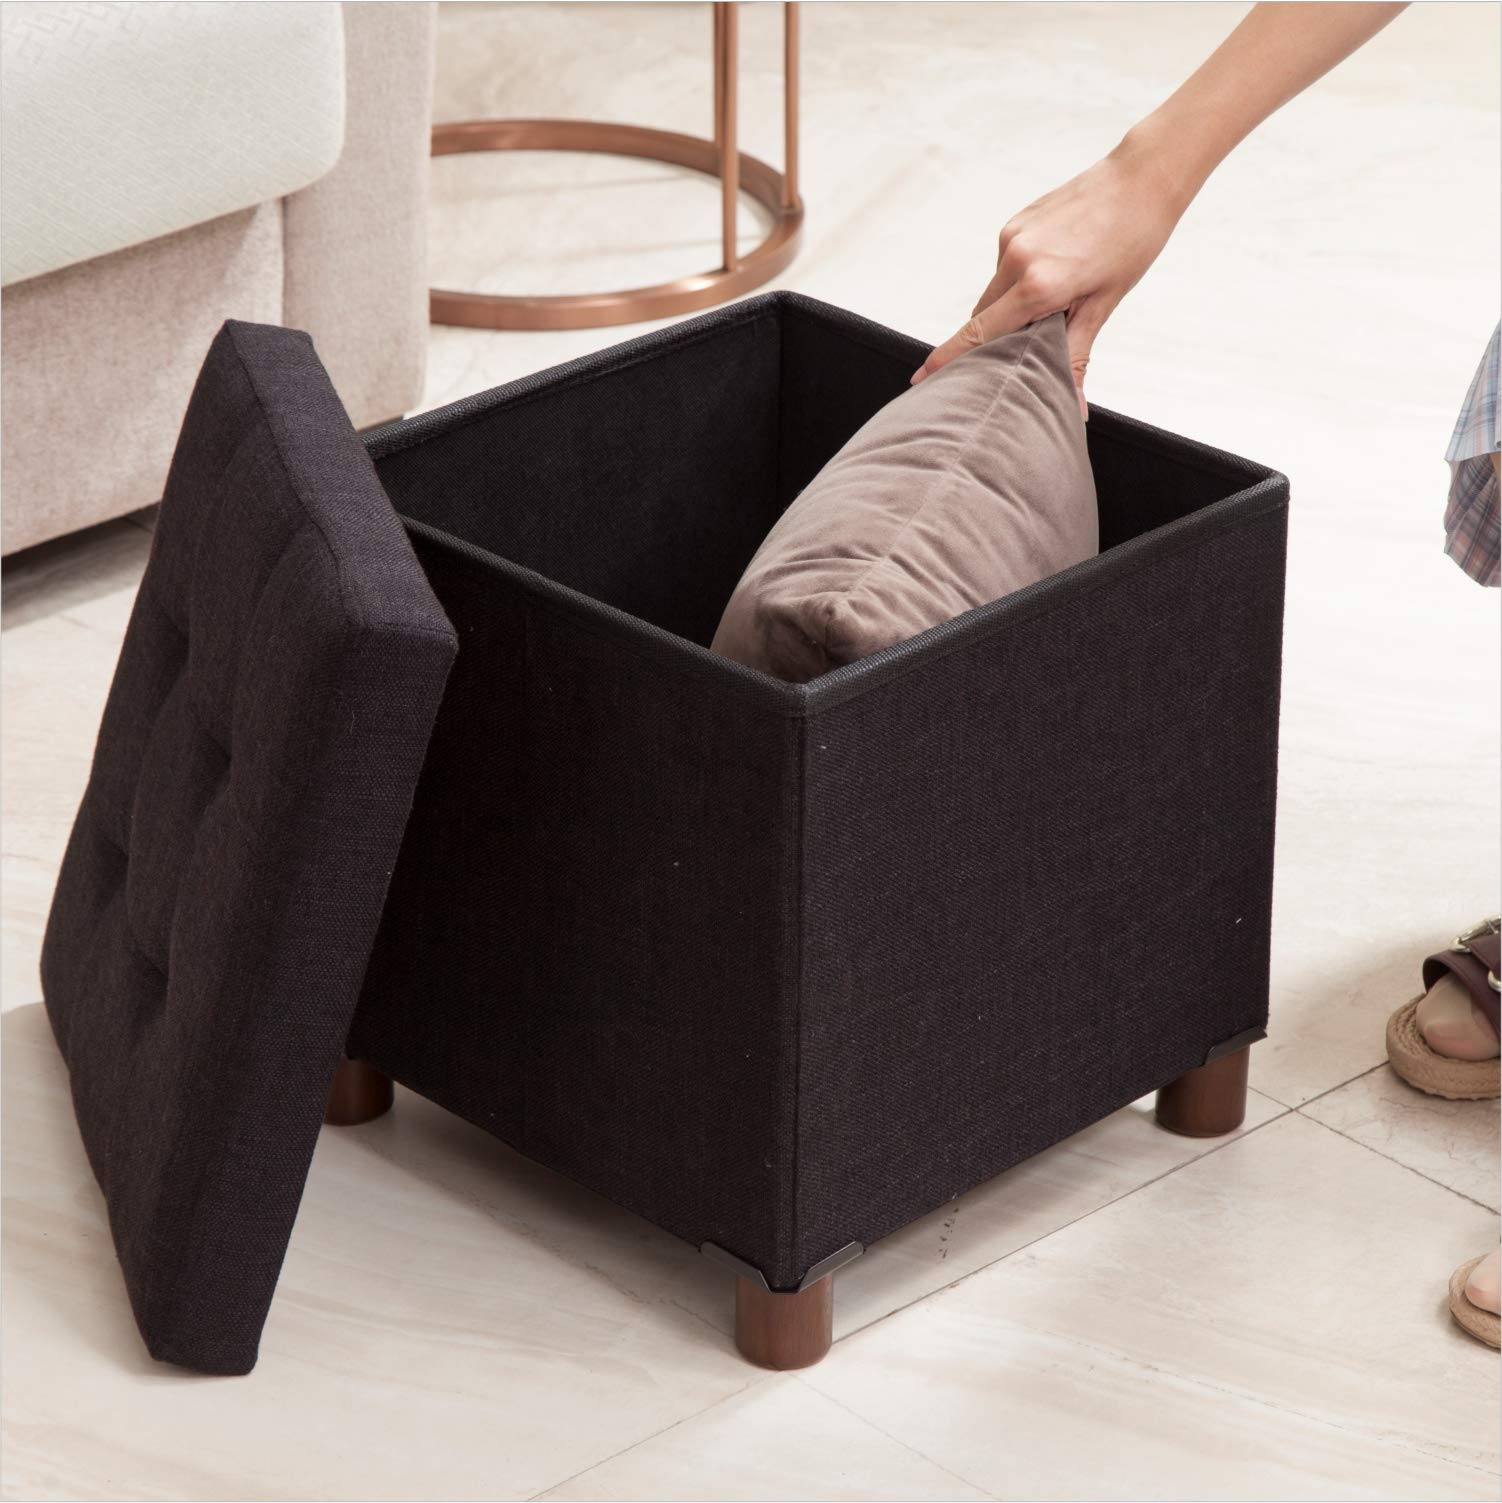 Set of 2 Foot Stool Storage Ottoman Seats Folding with Lids 15 x 15 In with  Pockets, 1 unit - Pick 'n Save